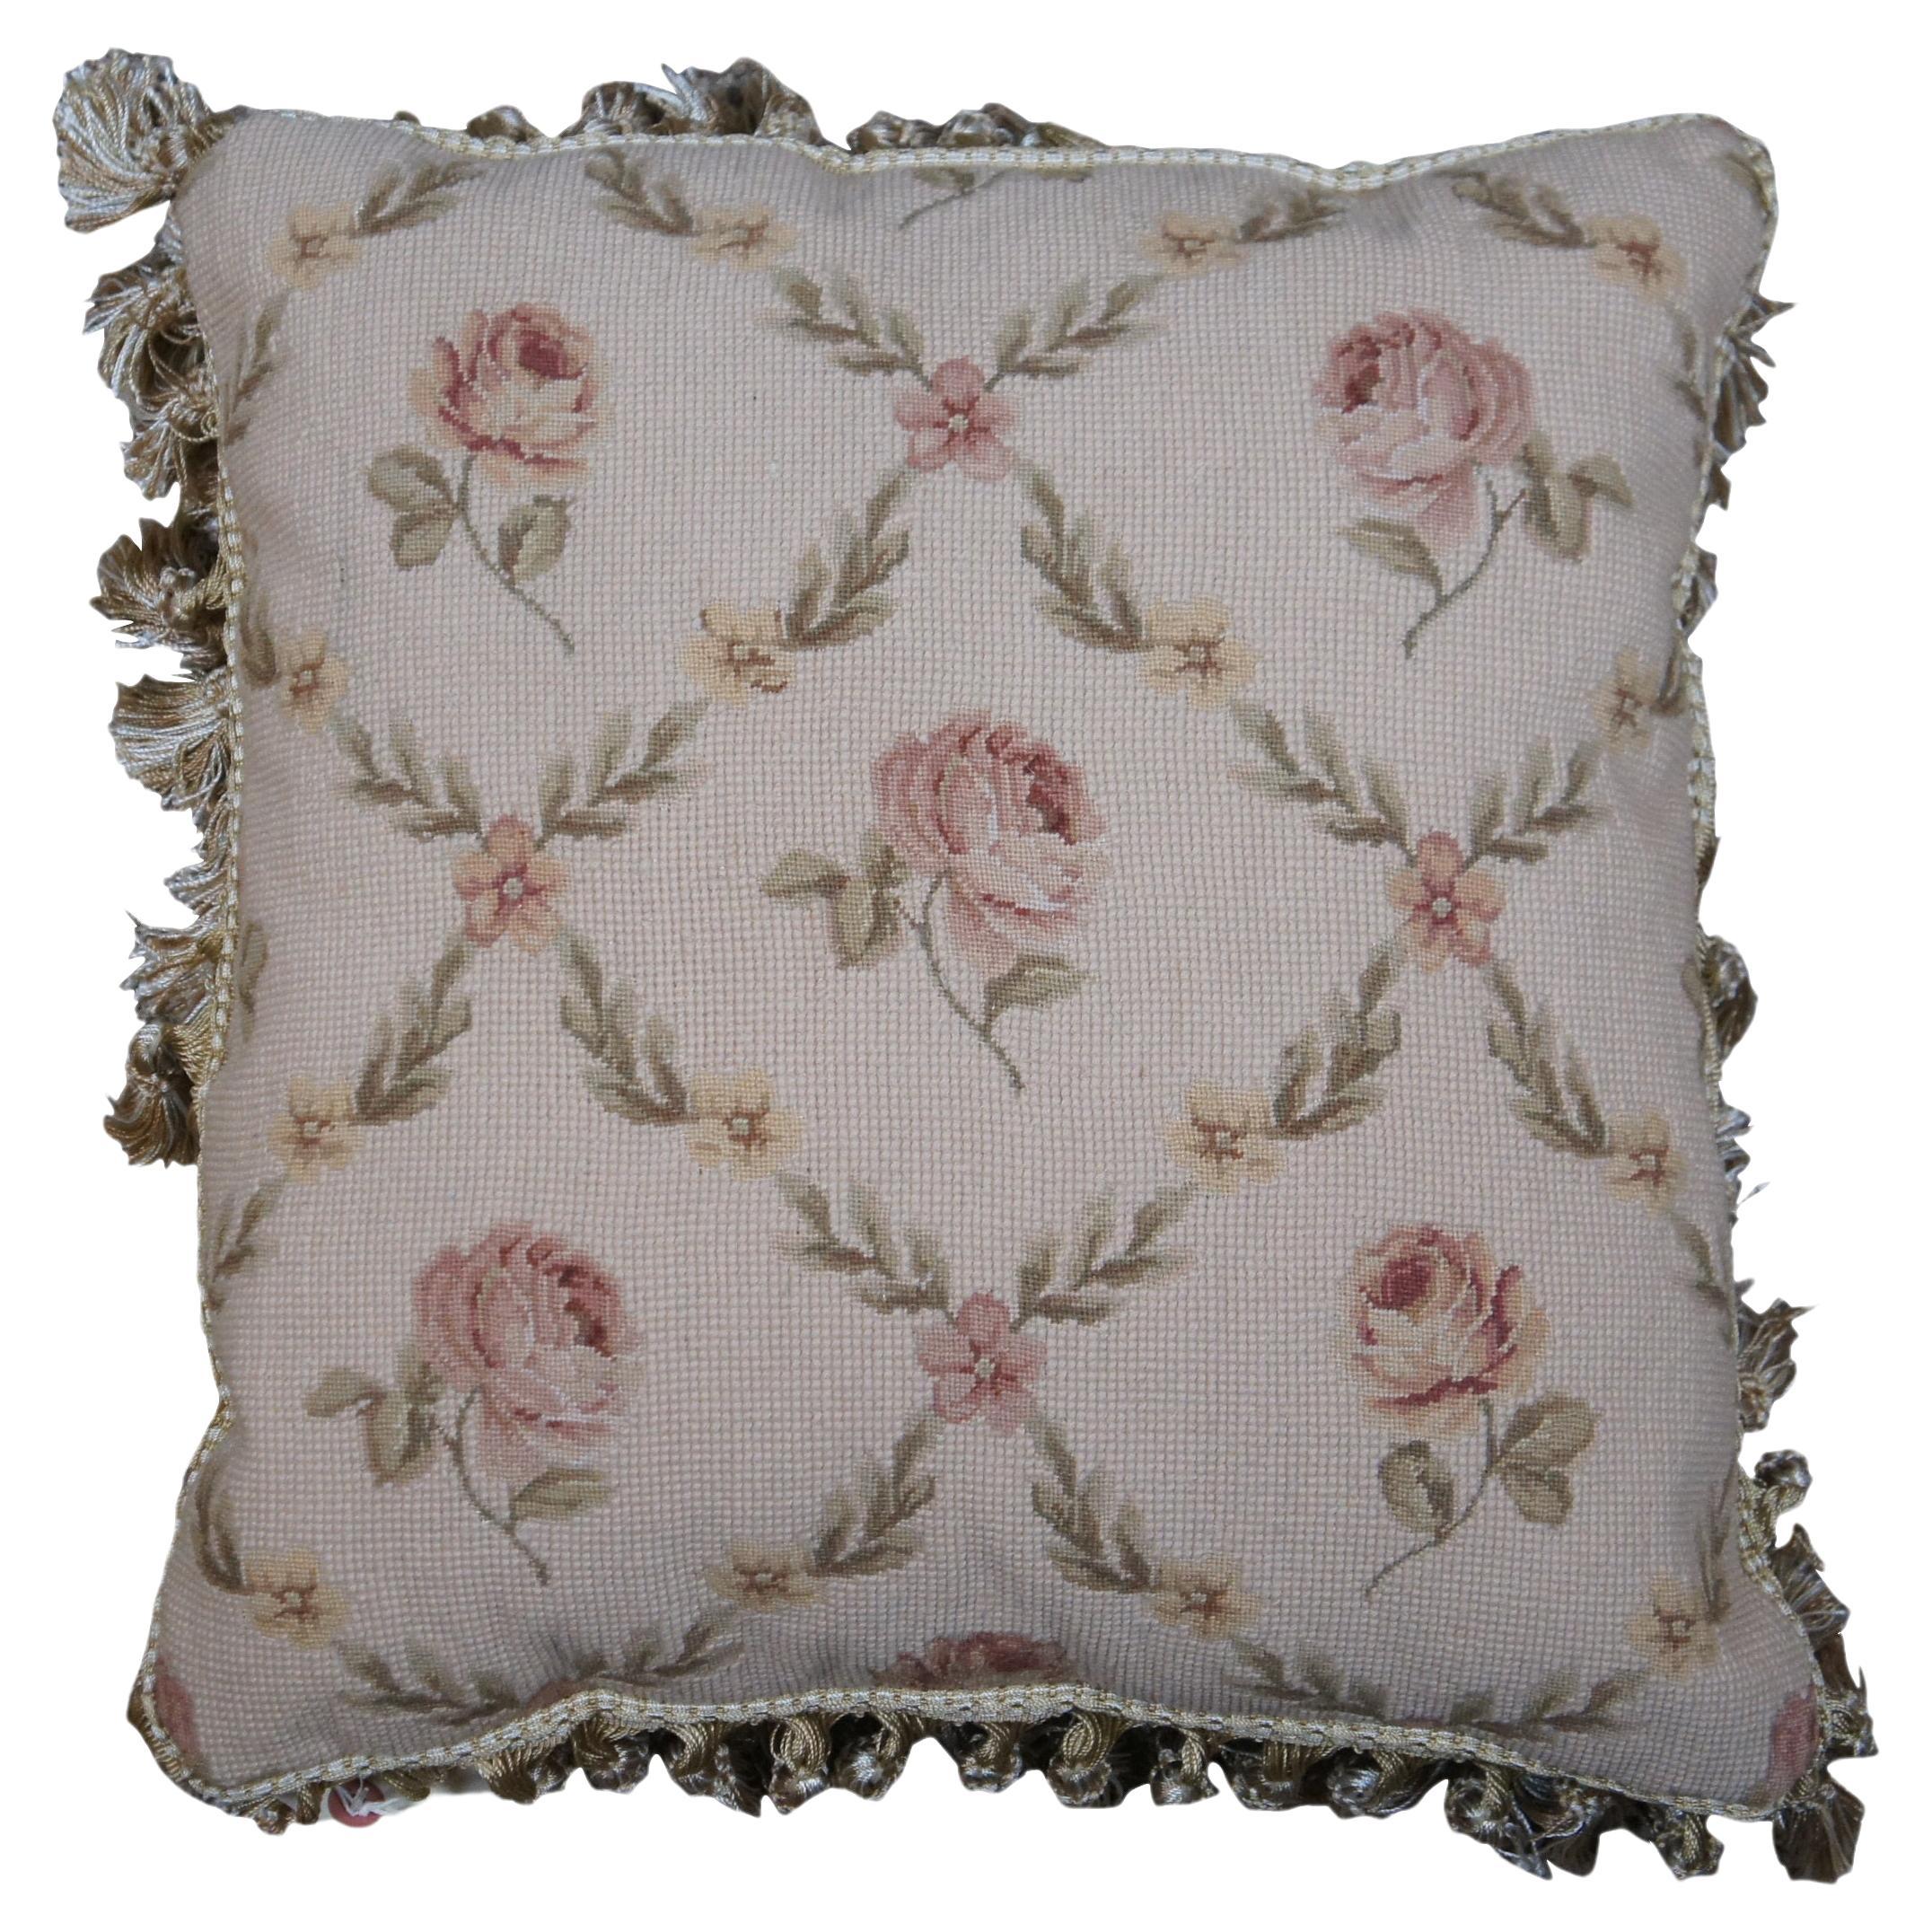 Down Filled Floral Crossed Roses Needlepoint Tassel Lumbar Throw Pillow 18"